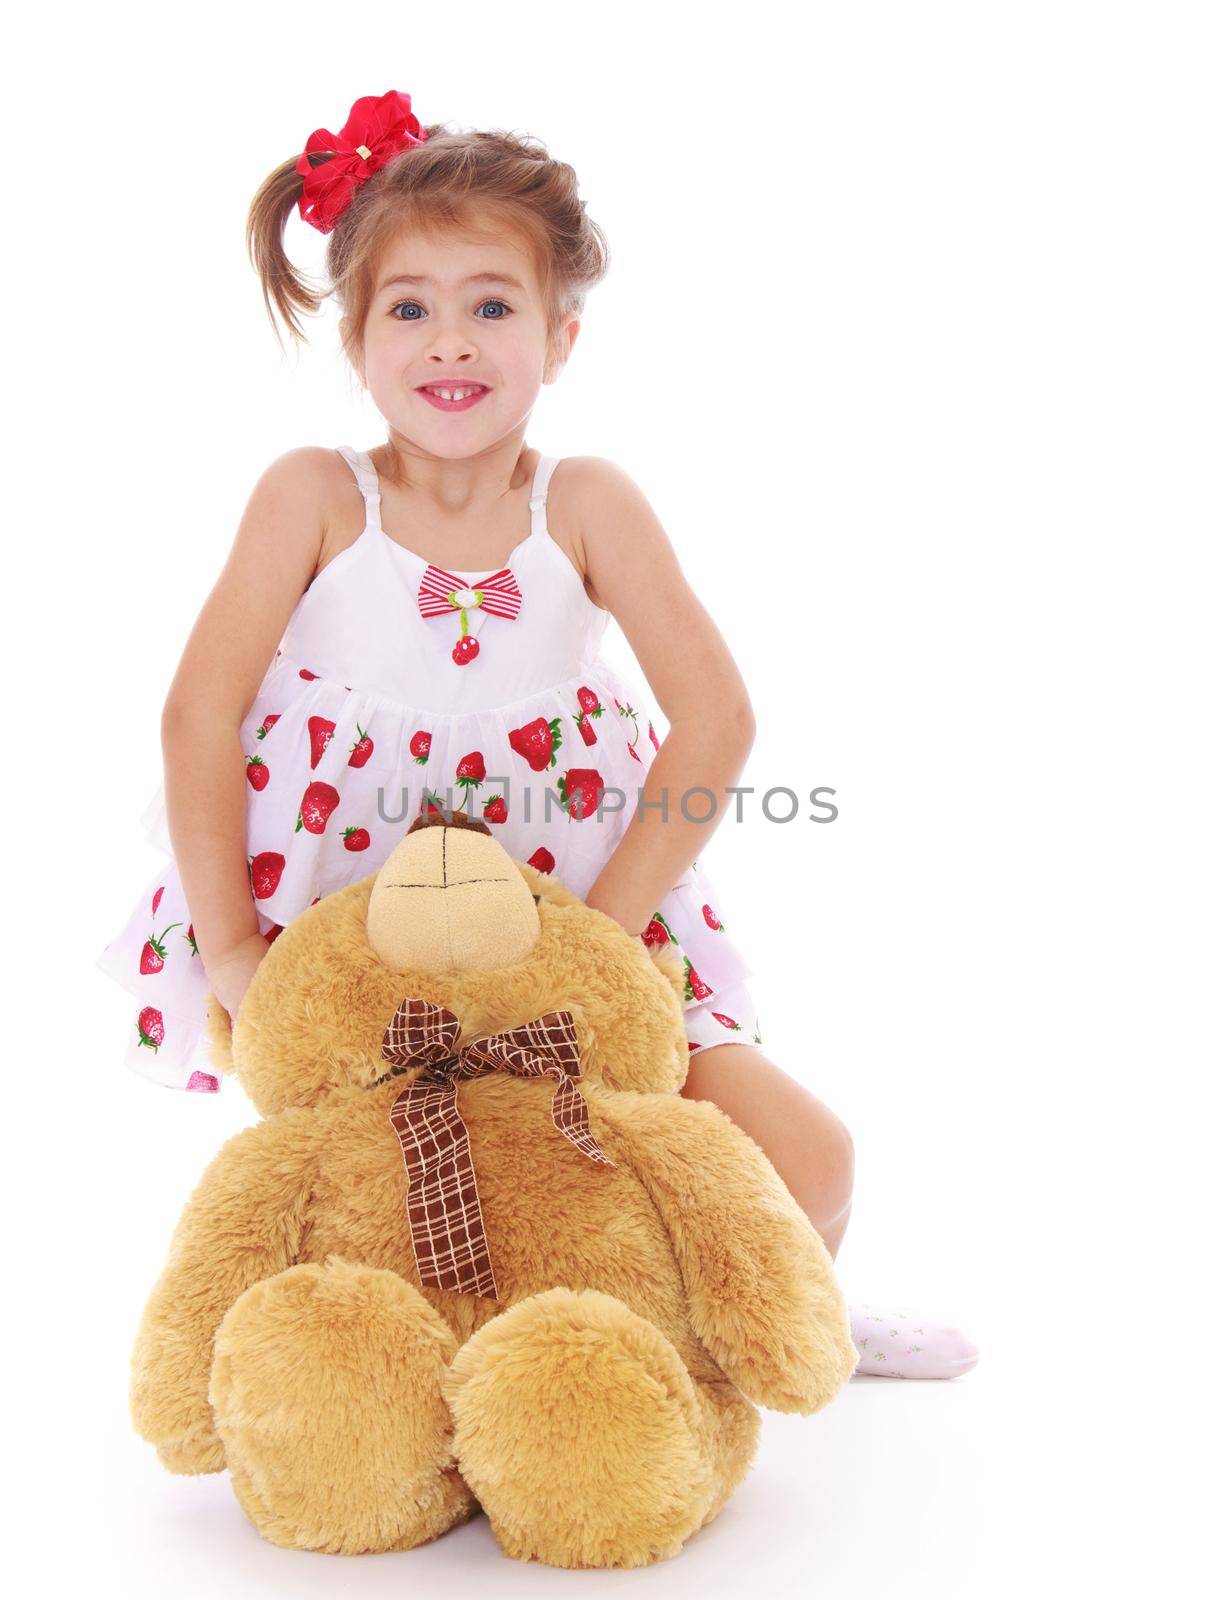 Cute little girl in a light summer dress that hugs a Teddy bear - Isolated on white background